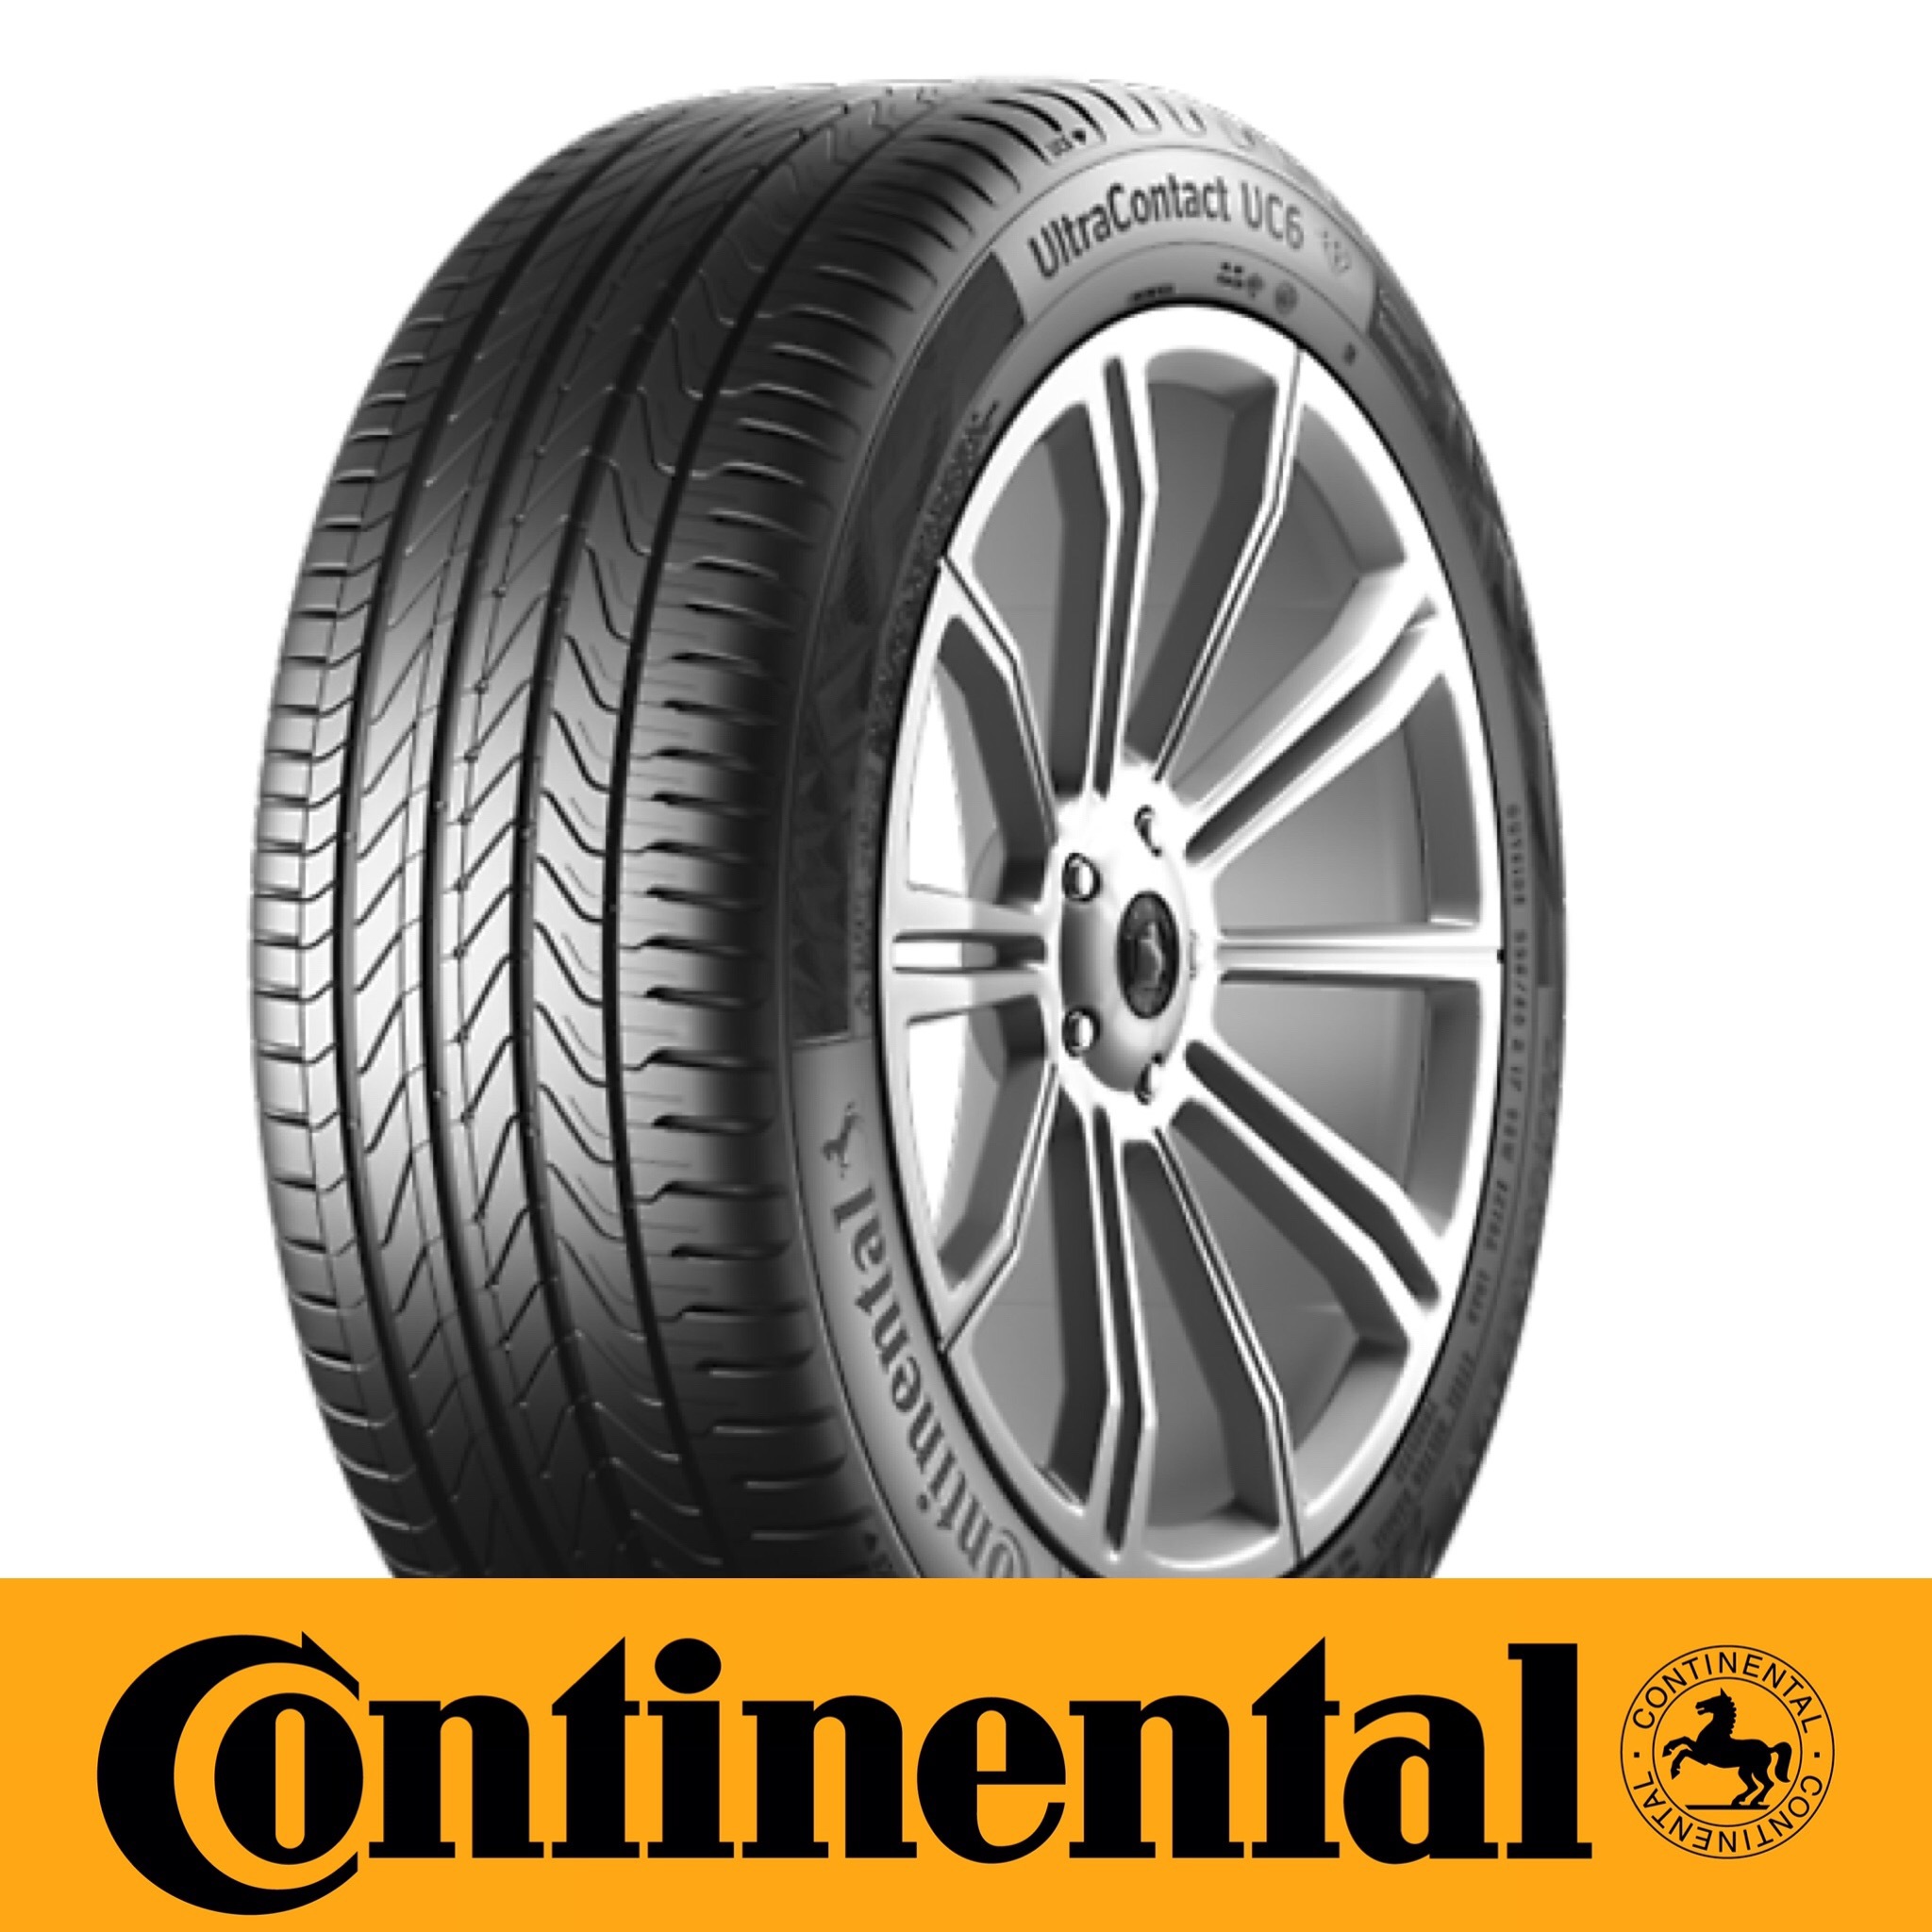 Continental-UltraContact-205-55R16-91W-(b)